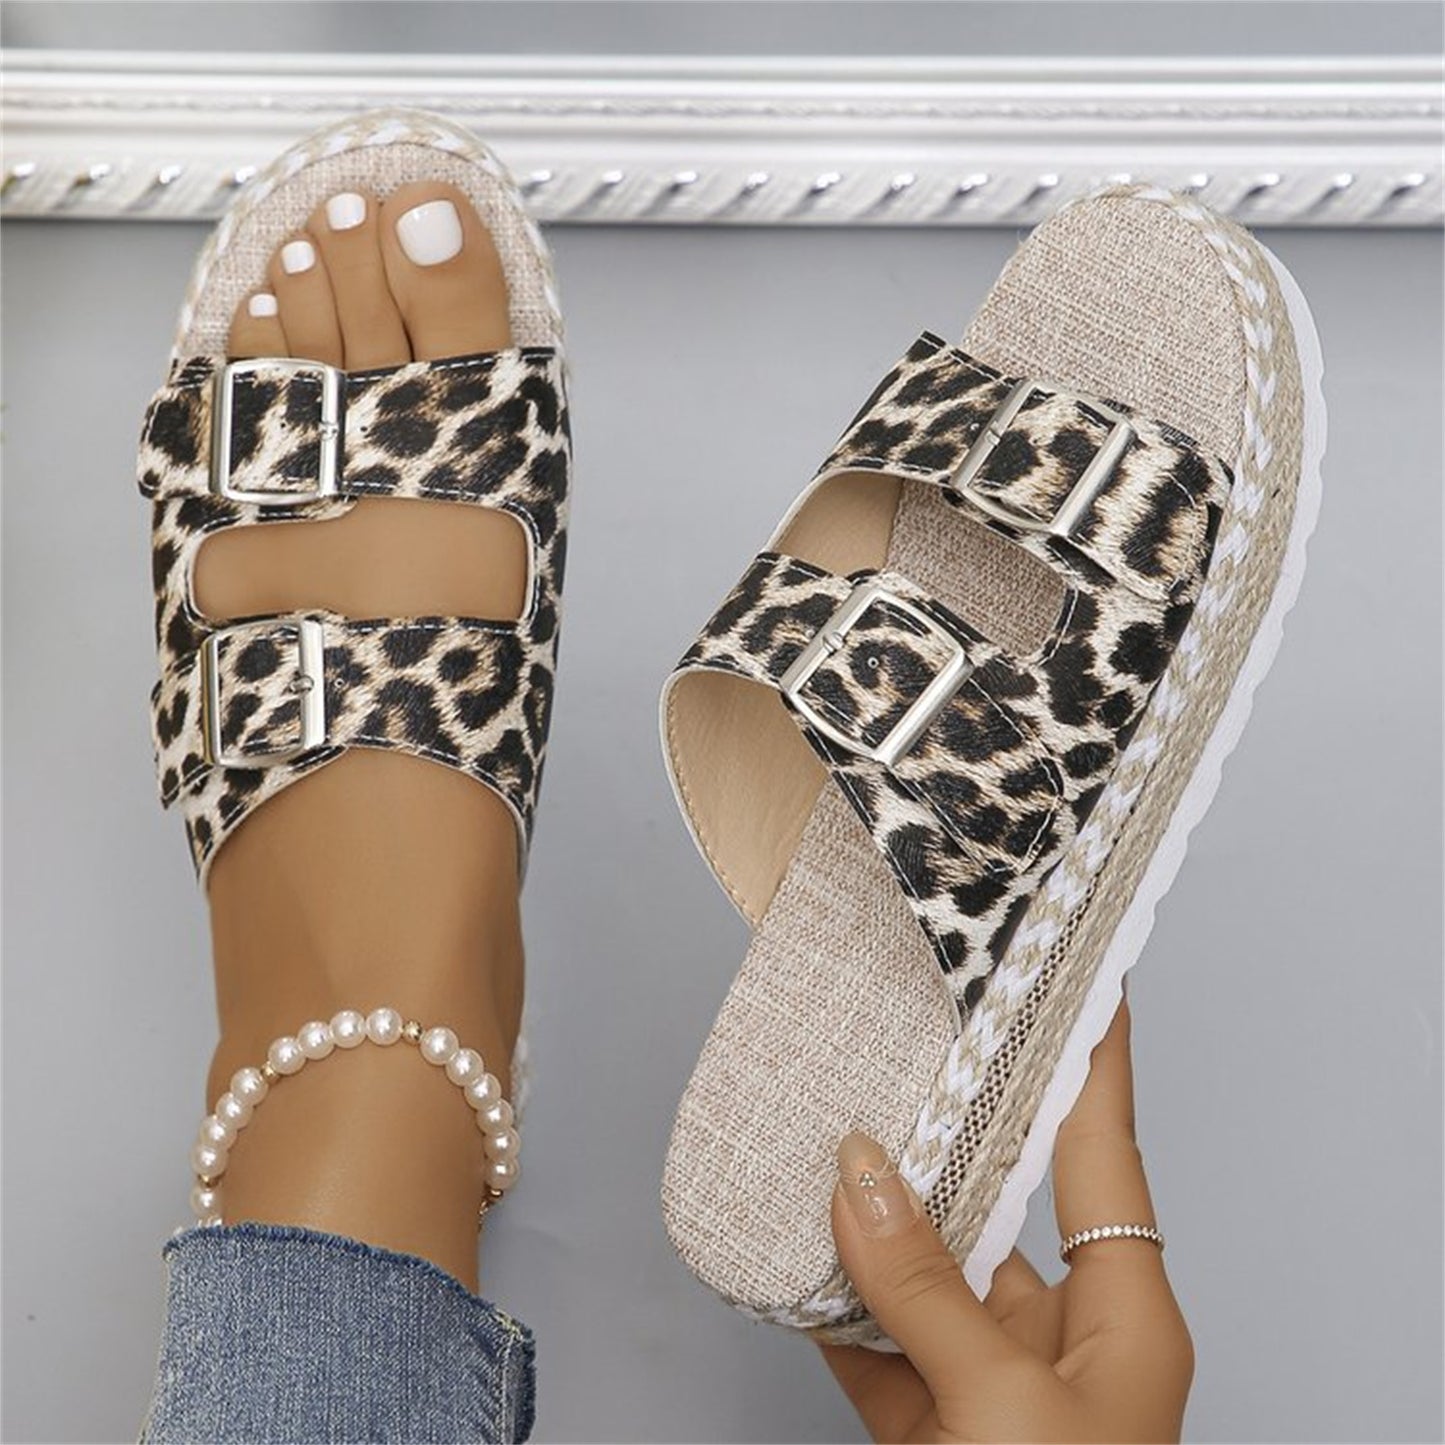 Summer Double Buckle Leopard Print Flat Sandals Hemp Thick-soled Sandals Seaside Vacation Beach Shoes For Women